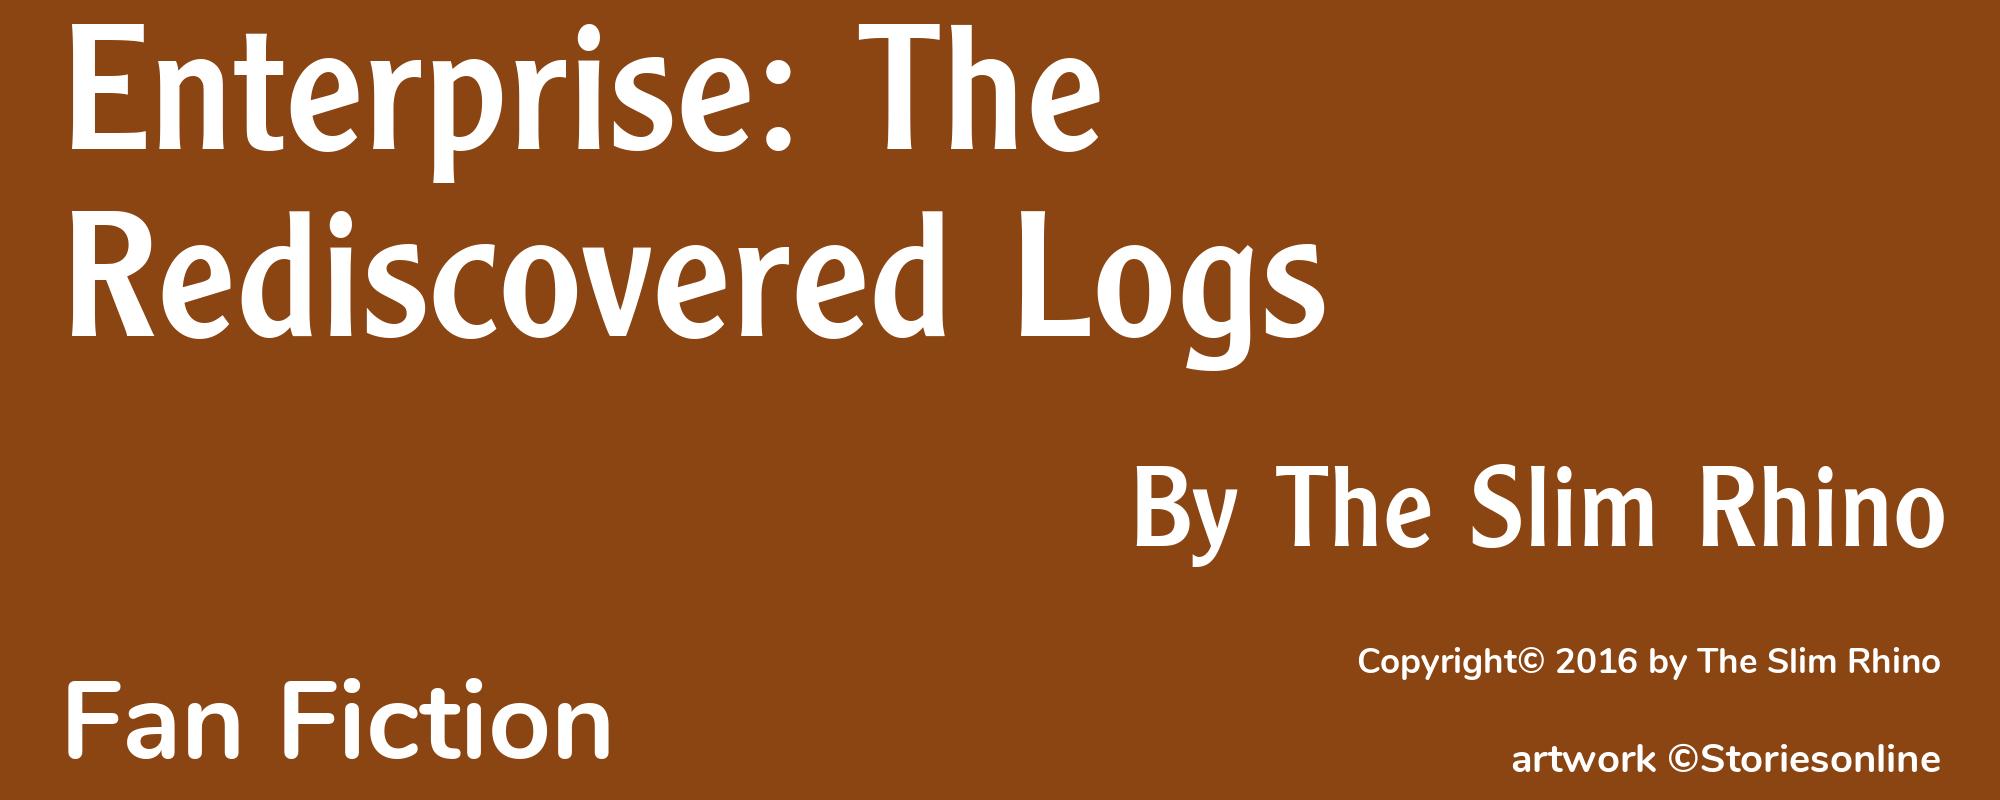 Enterprise: The Rediscovered Logs - Cover